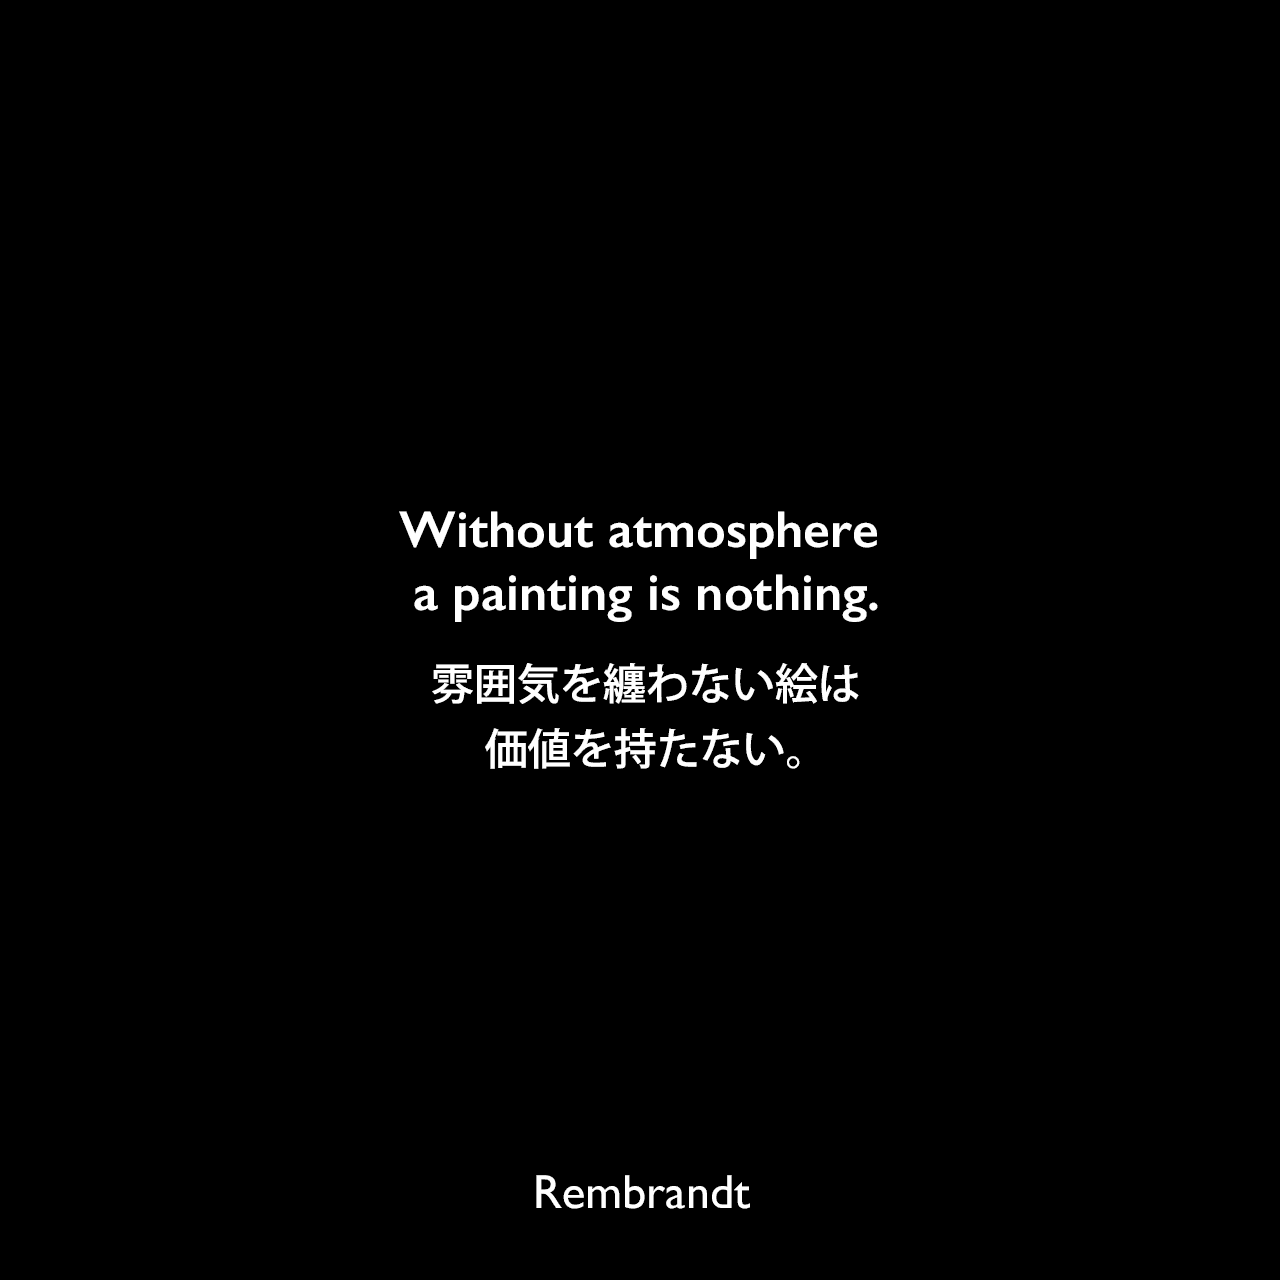 Without atmosphere a painting is nothing.雰囲気を纏わない絵は価値を持たない。Rembrandt